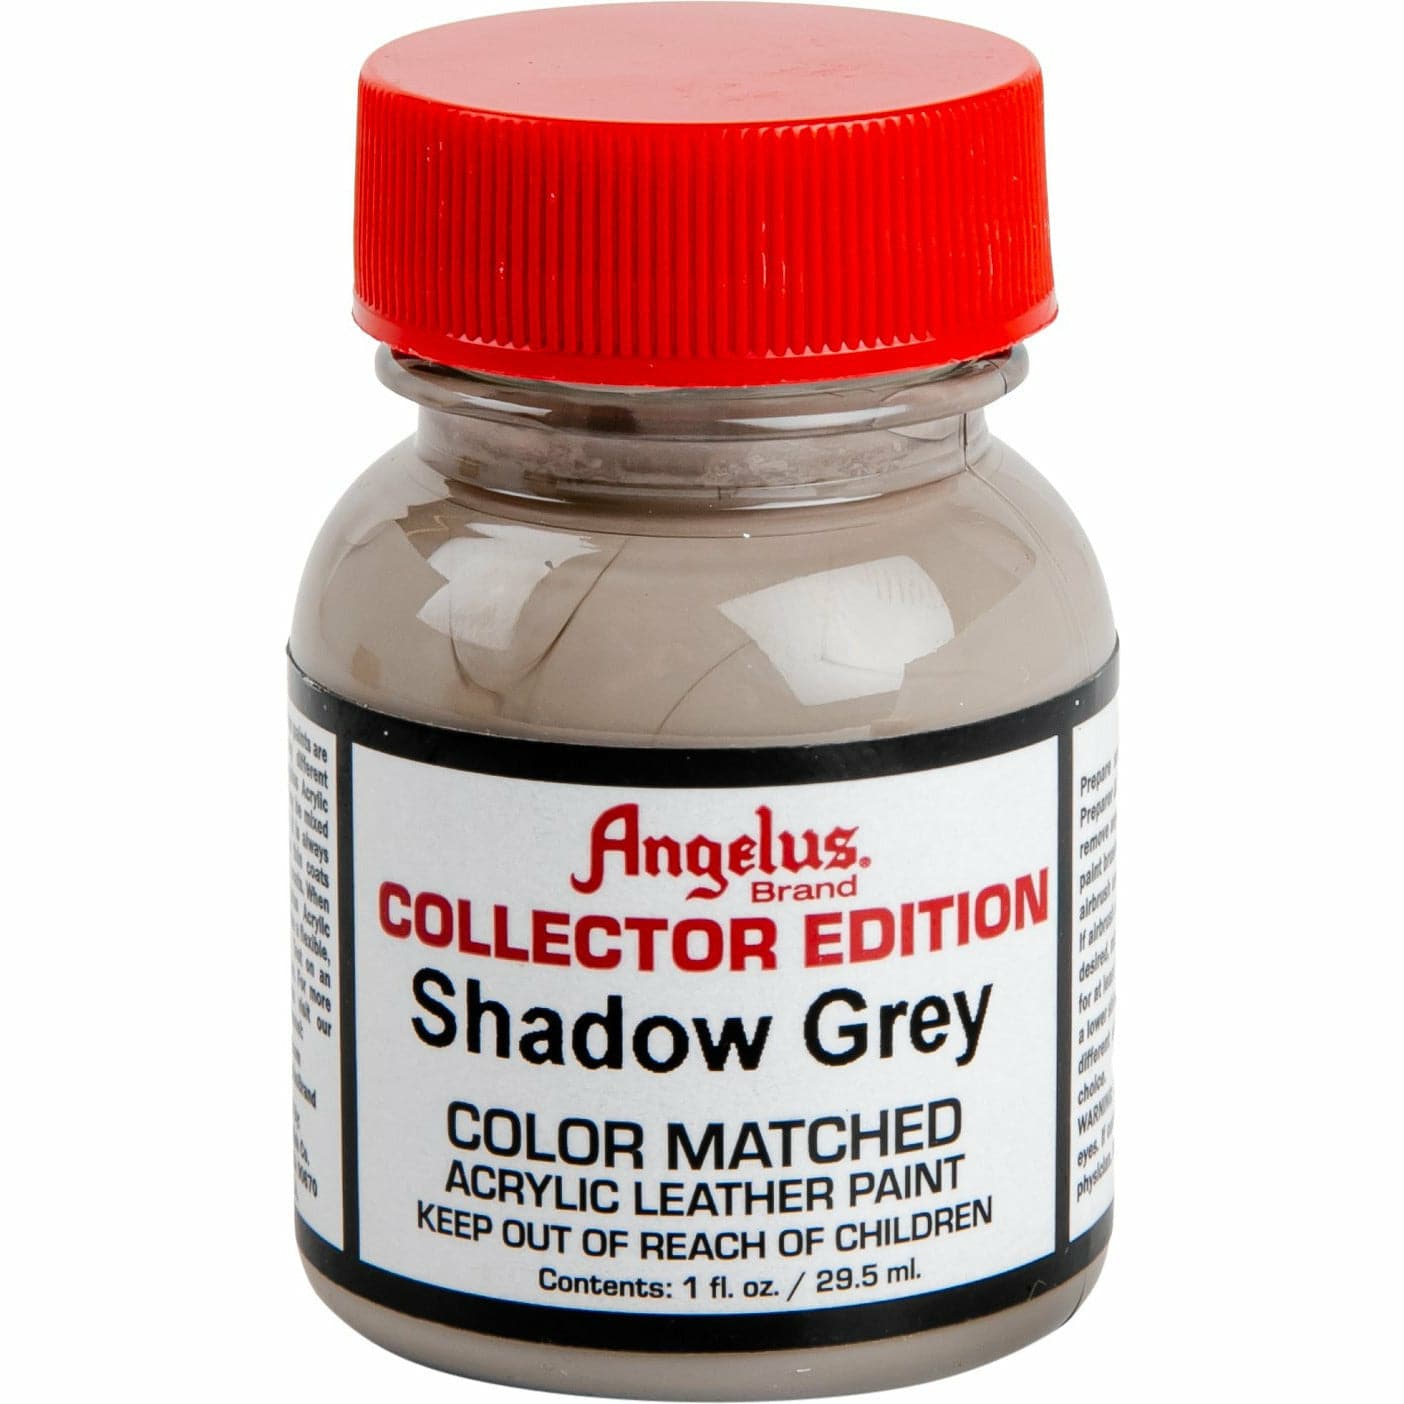 Image of Angelus Collectors Edition Acrylic Paint Shadow Grey #348 29Ml For Leather, Vinyl, Fabric